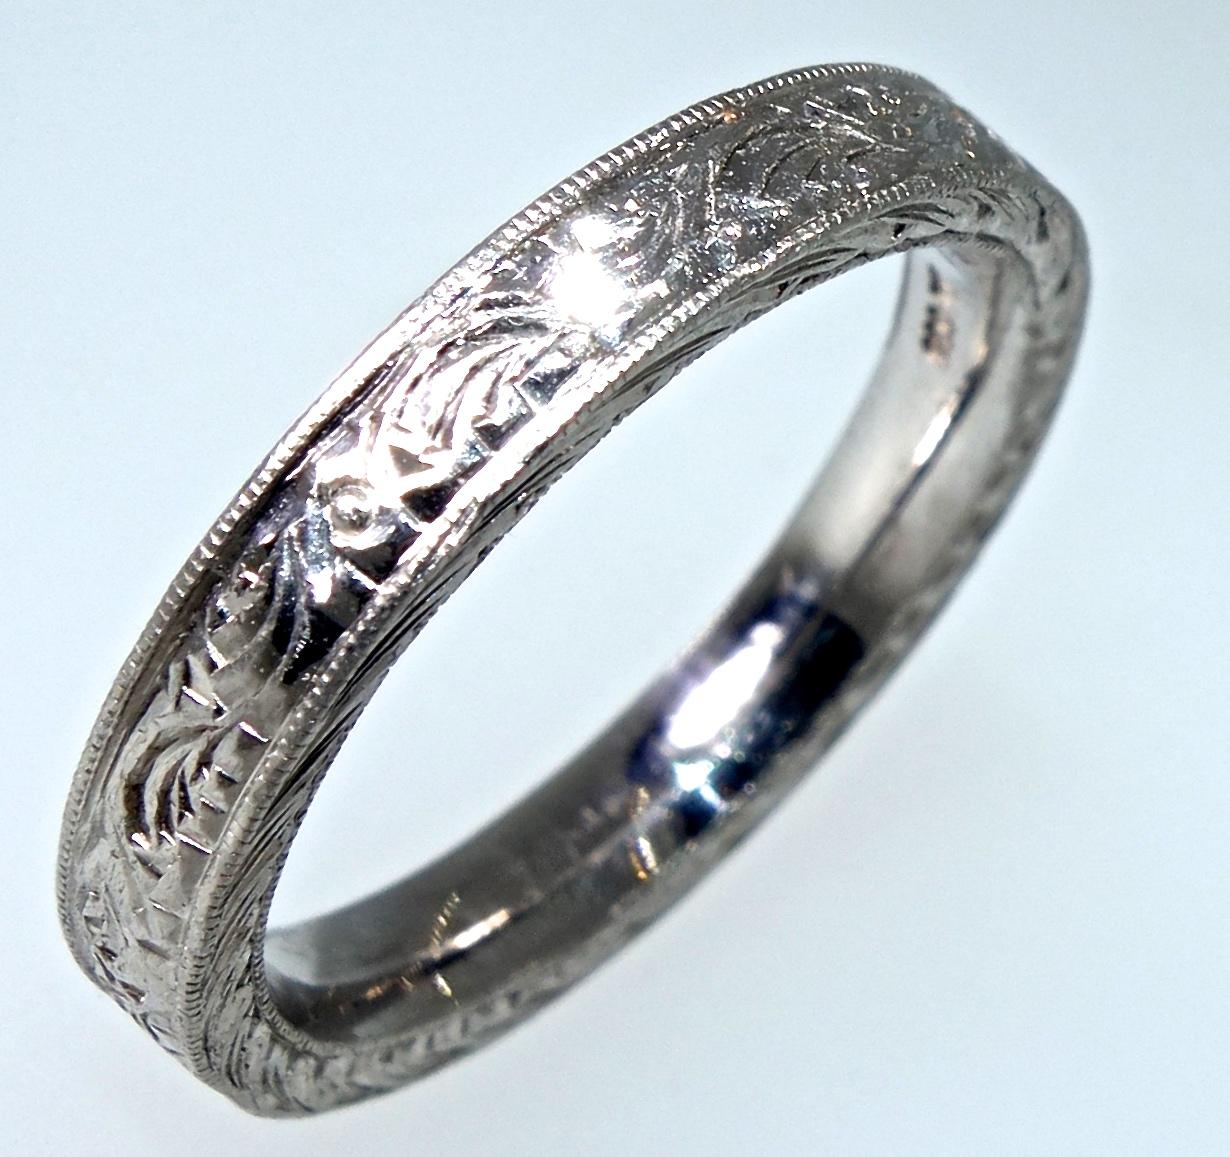 Beaudry hand made and highly engraved platinum band, new and never worn.  We have two of these bands - that are extremely similar with very slightly different engraving patterns.  We have photographed both for your convenience.   PLEASE NOTE;   Your